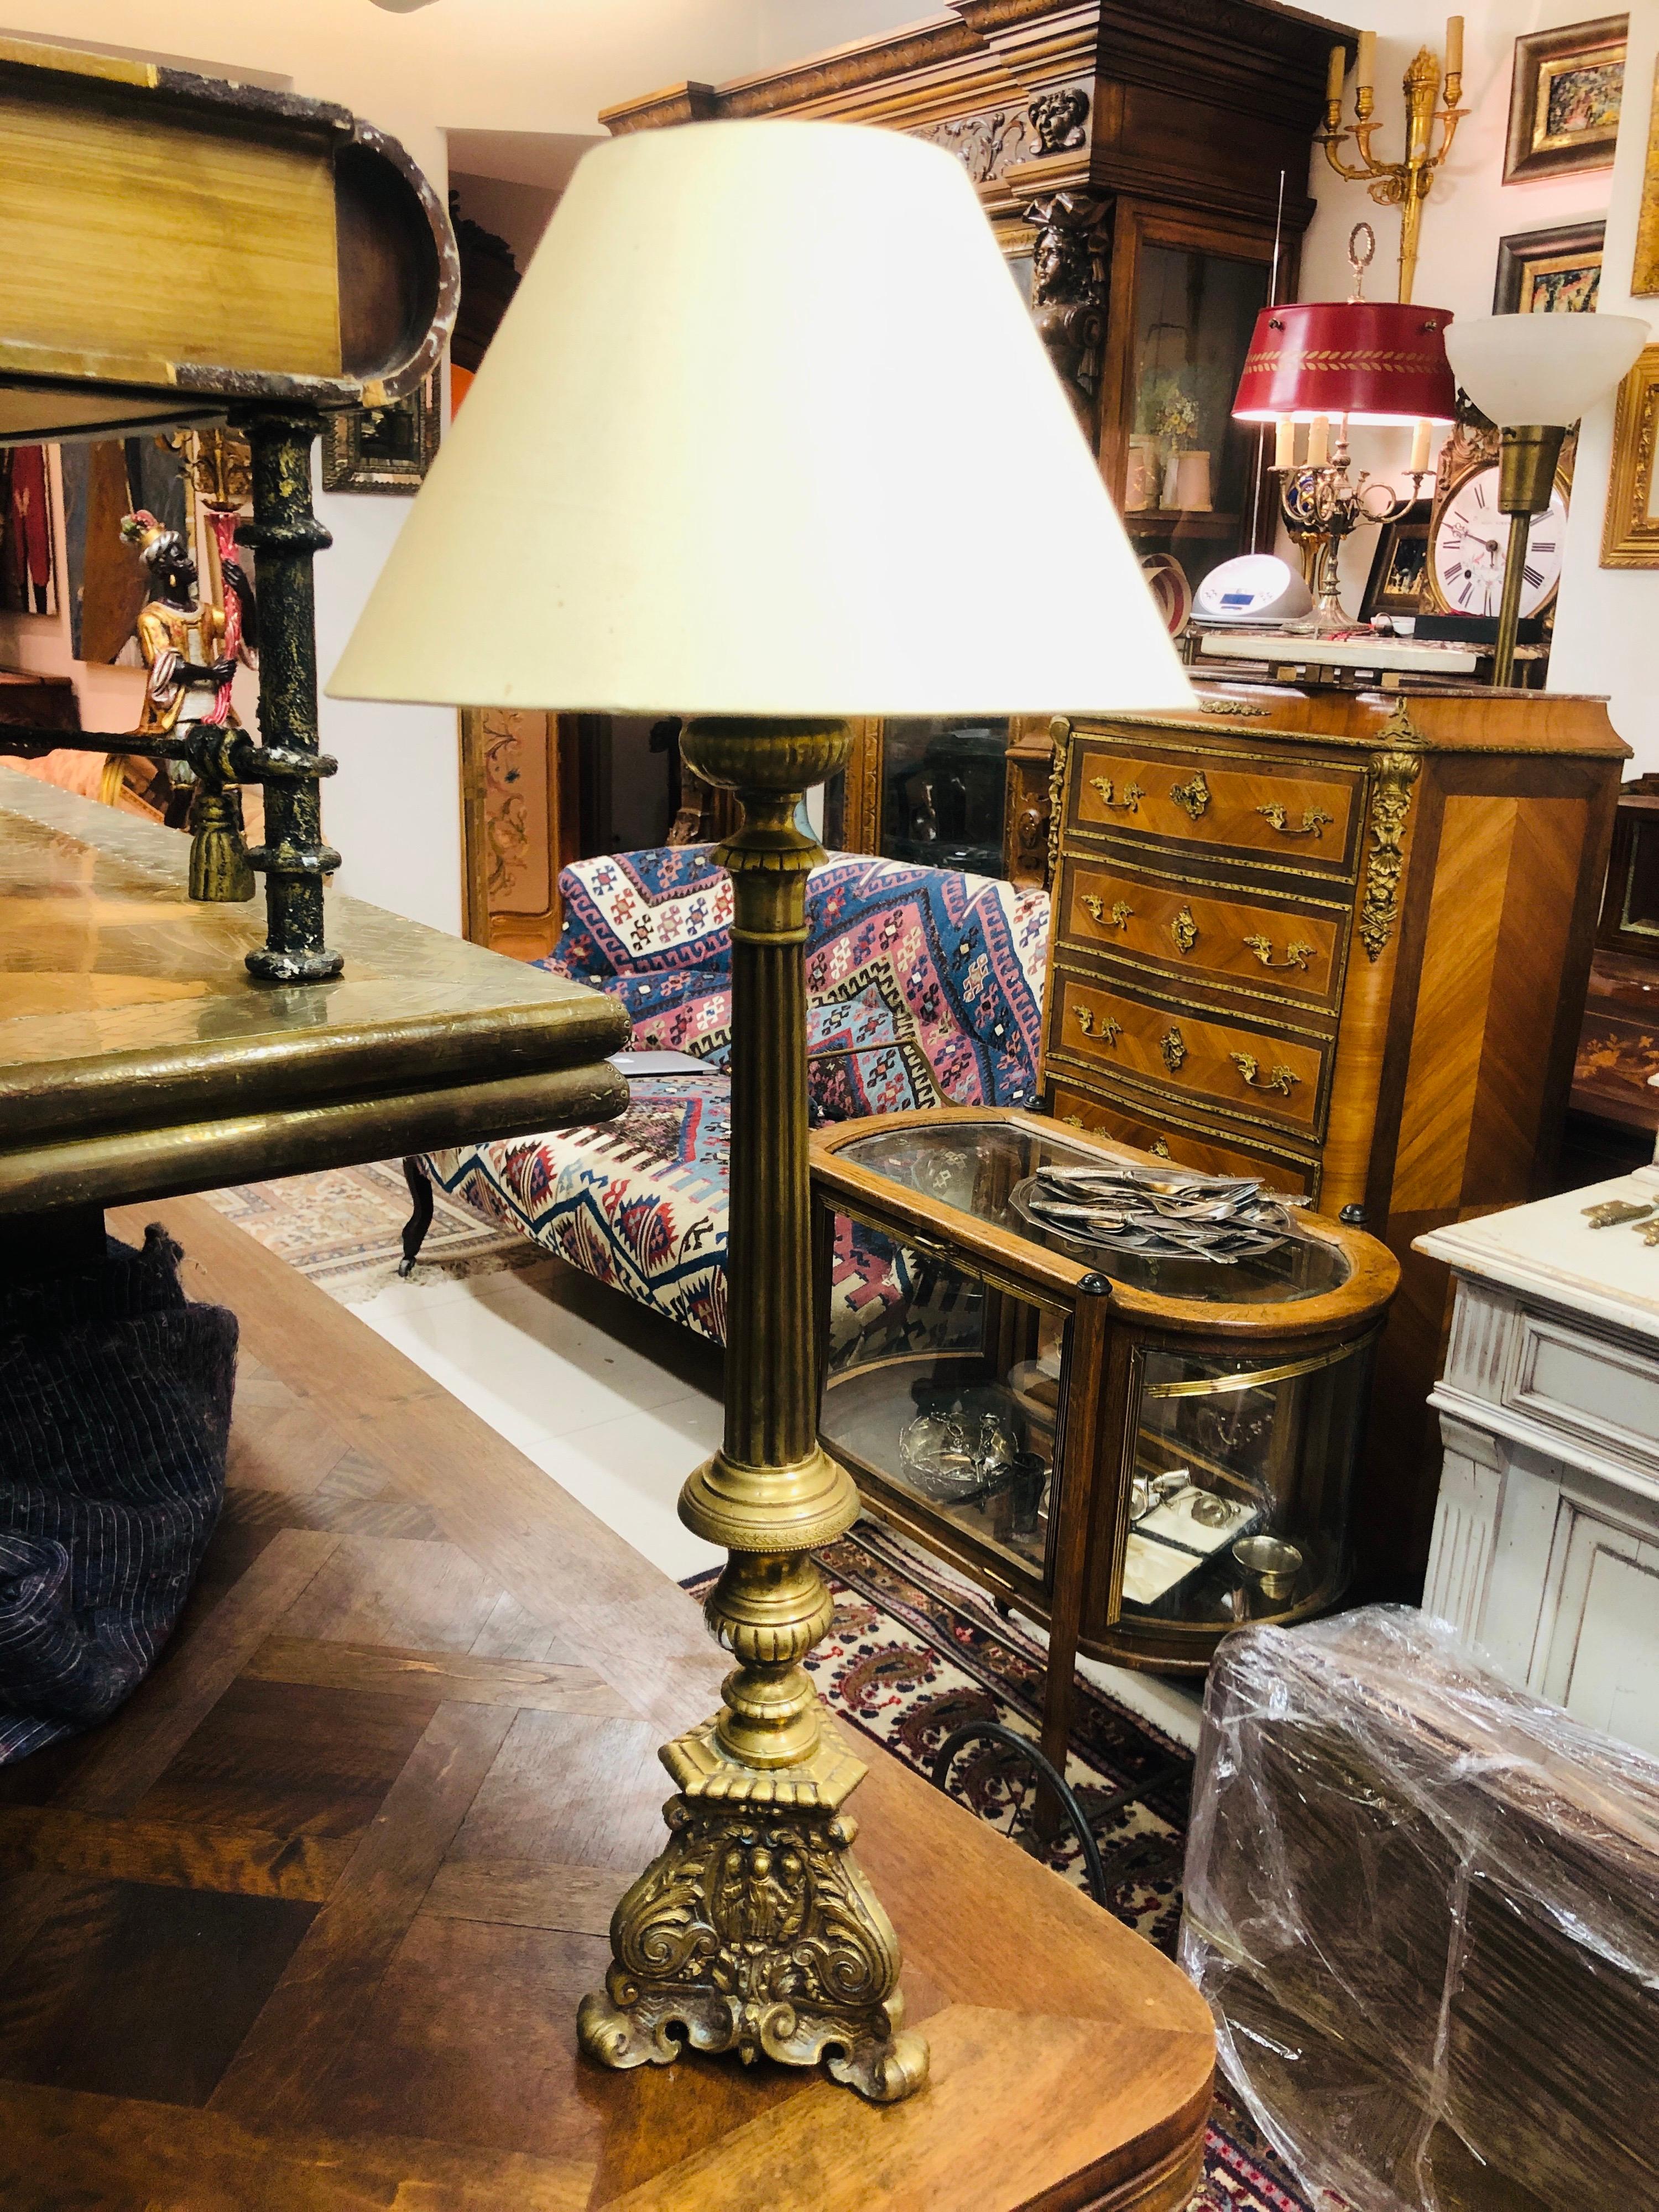 French table lamp standing on richly decorated brass base with small figures on the bottom.
France, circa 1920.